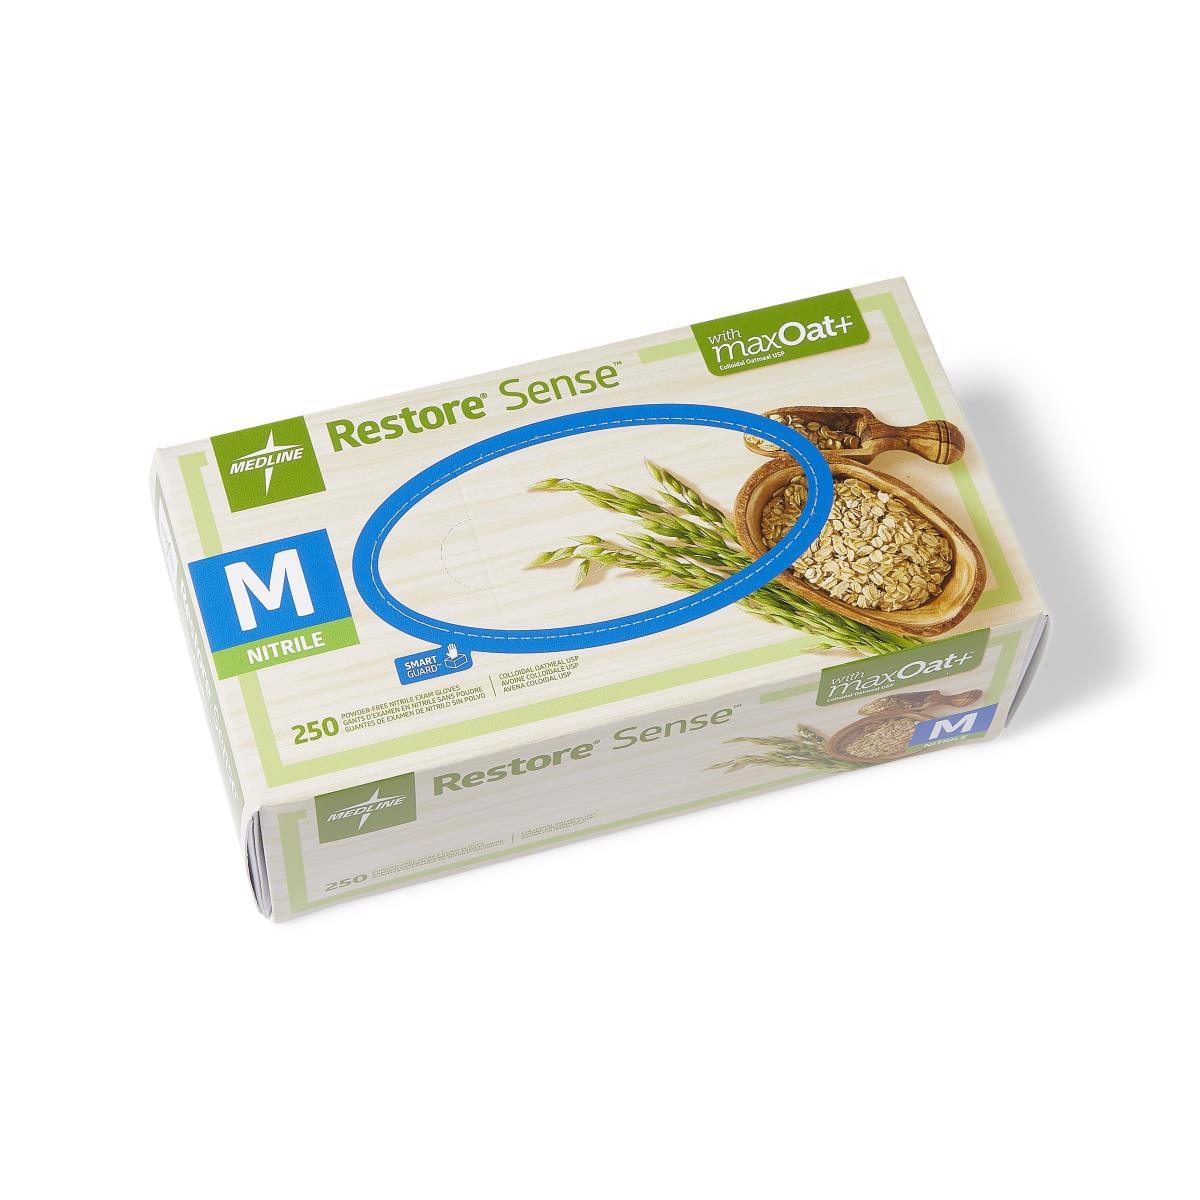 Restore® Sense Green Powder-Free Nitrile Gloves with maxOat+ colloidal oatmeal